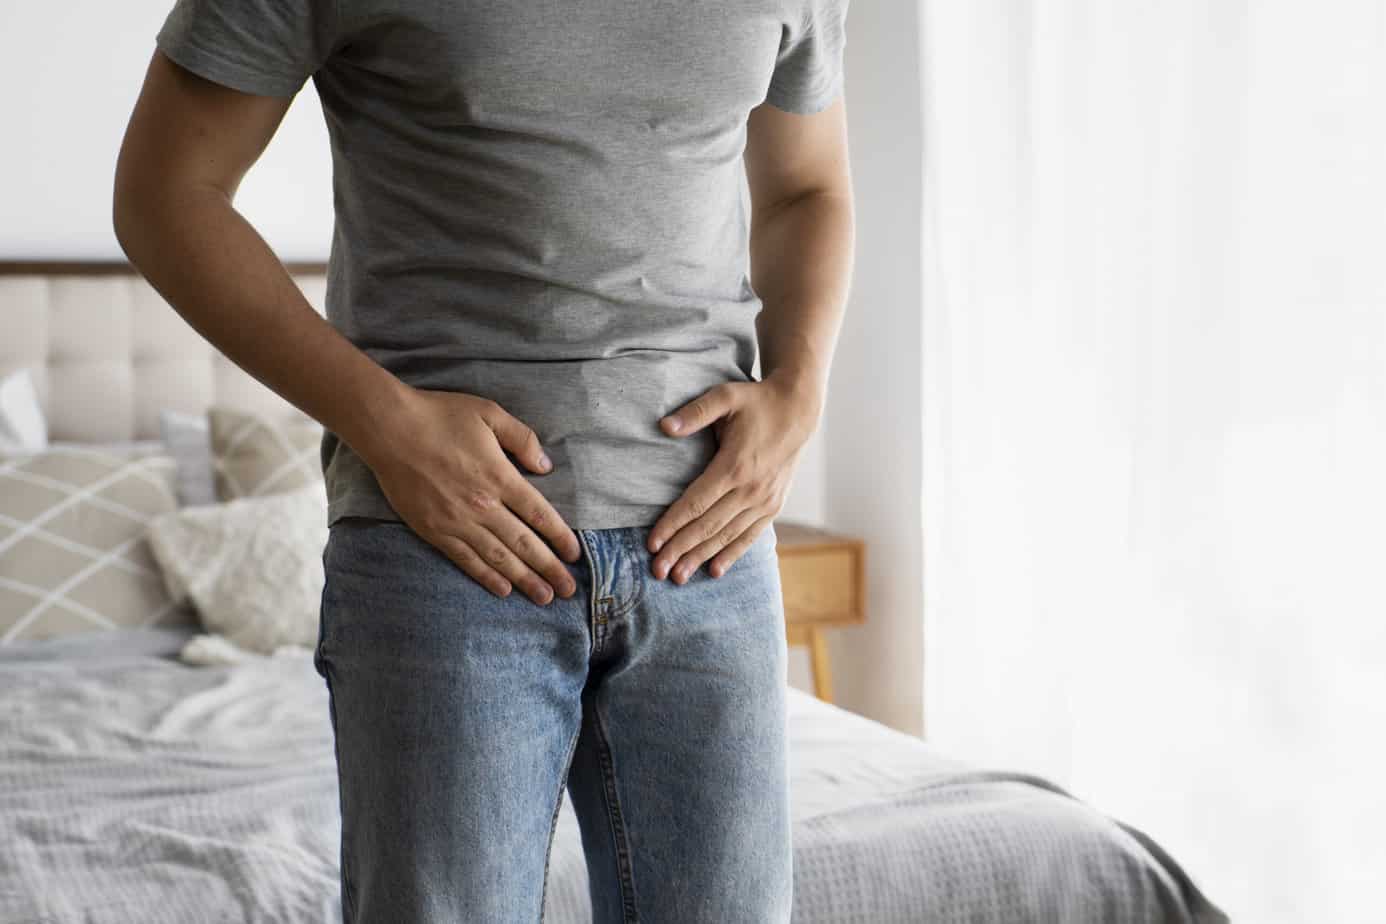 Pelvic Pain in Persons with a Penis